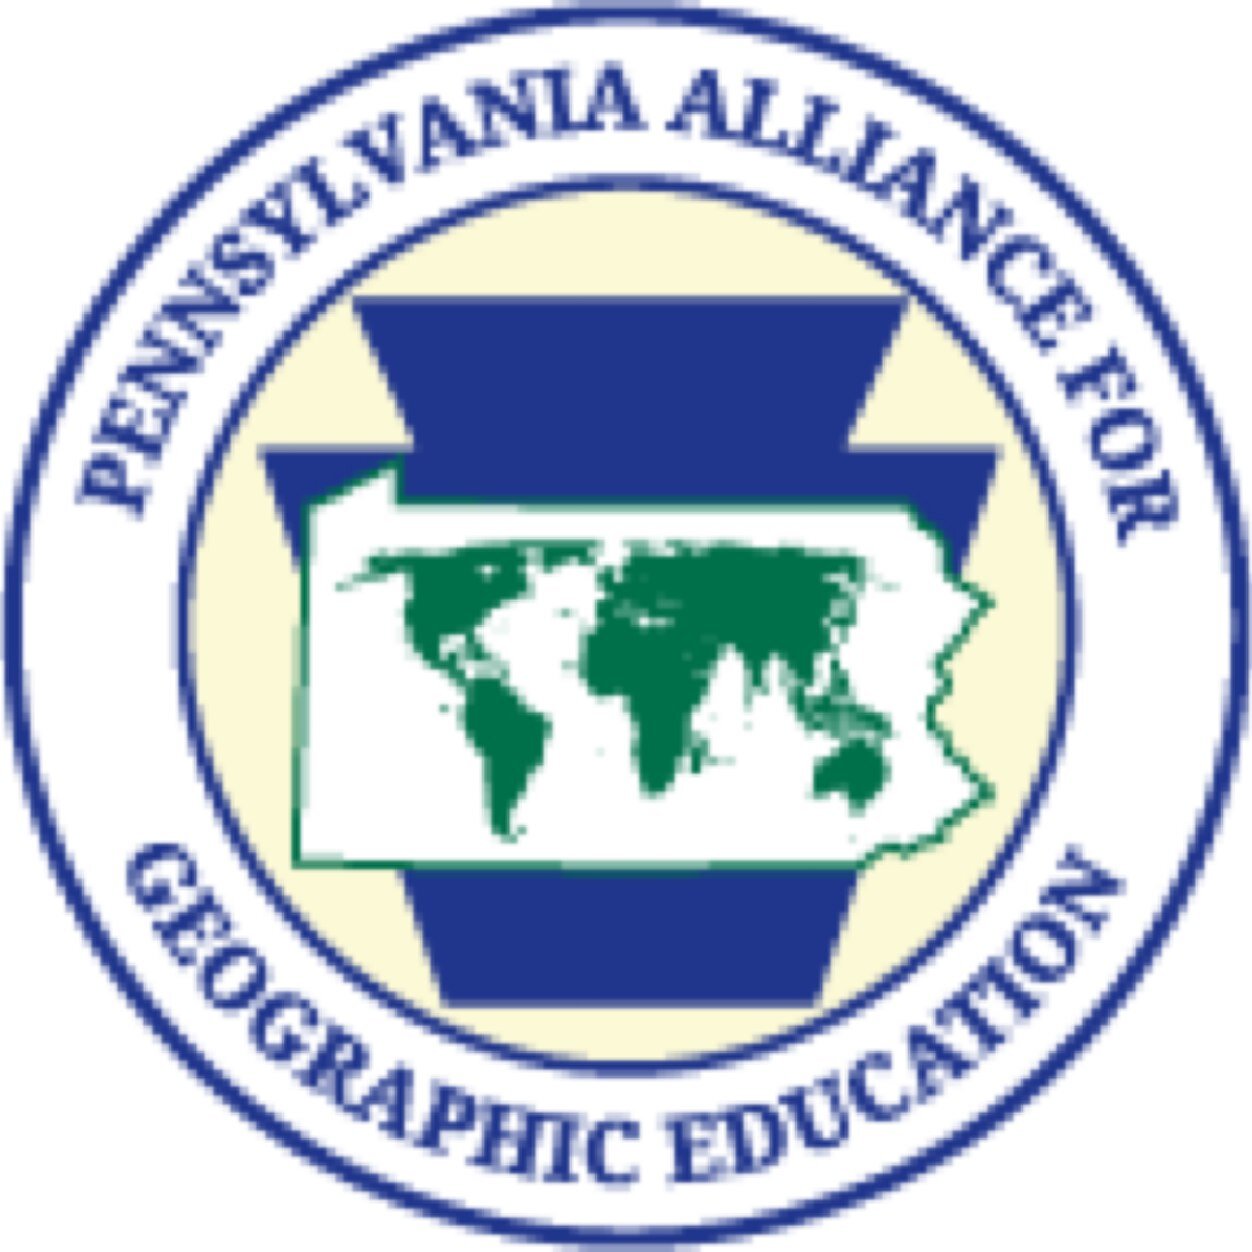 PAGE works in conjunction with the National Geographic Education Foundation to promote geographic literacy in the Commonwealth of PA.